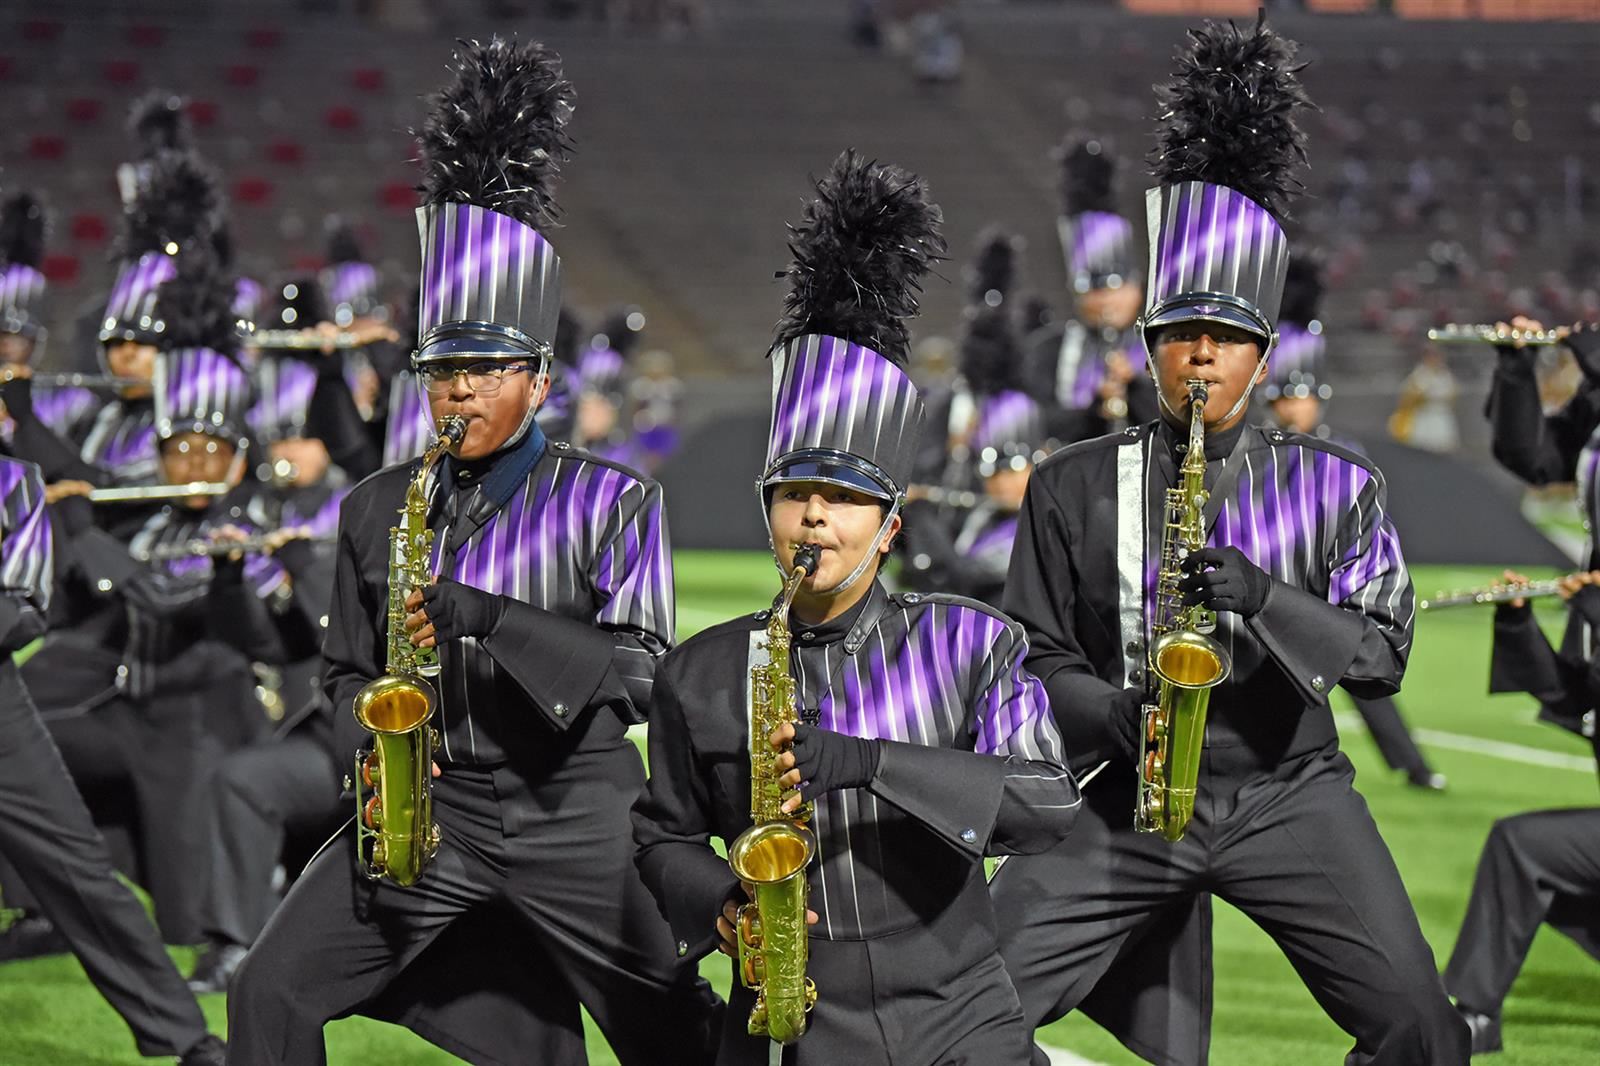 The sixth annual “Battle at the Berry” marching band contest will be Oct. 16 at Cy-Fair FCU Stadium.